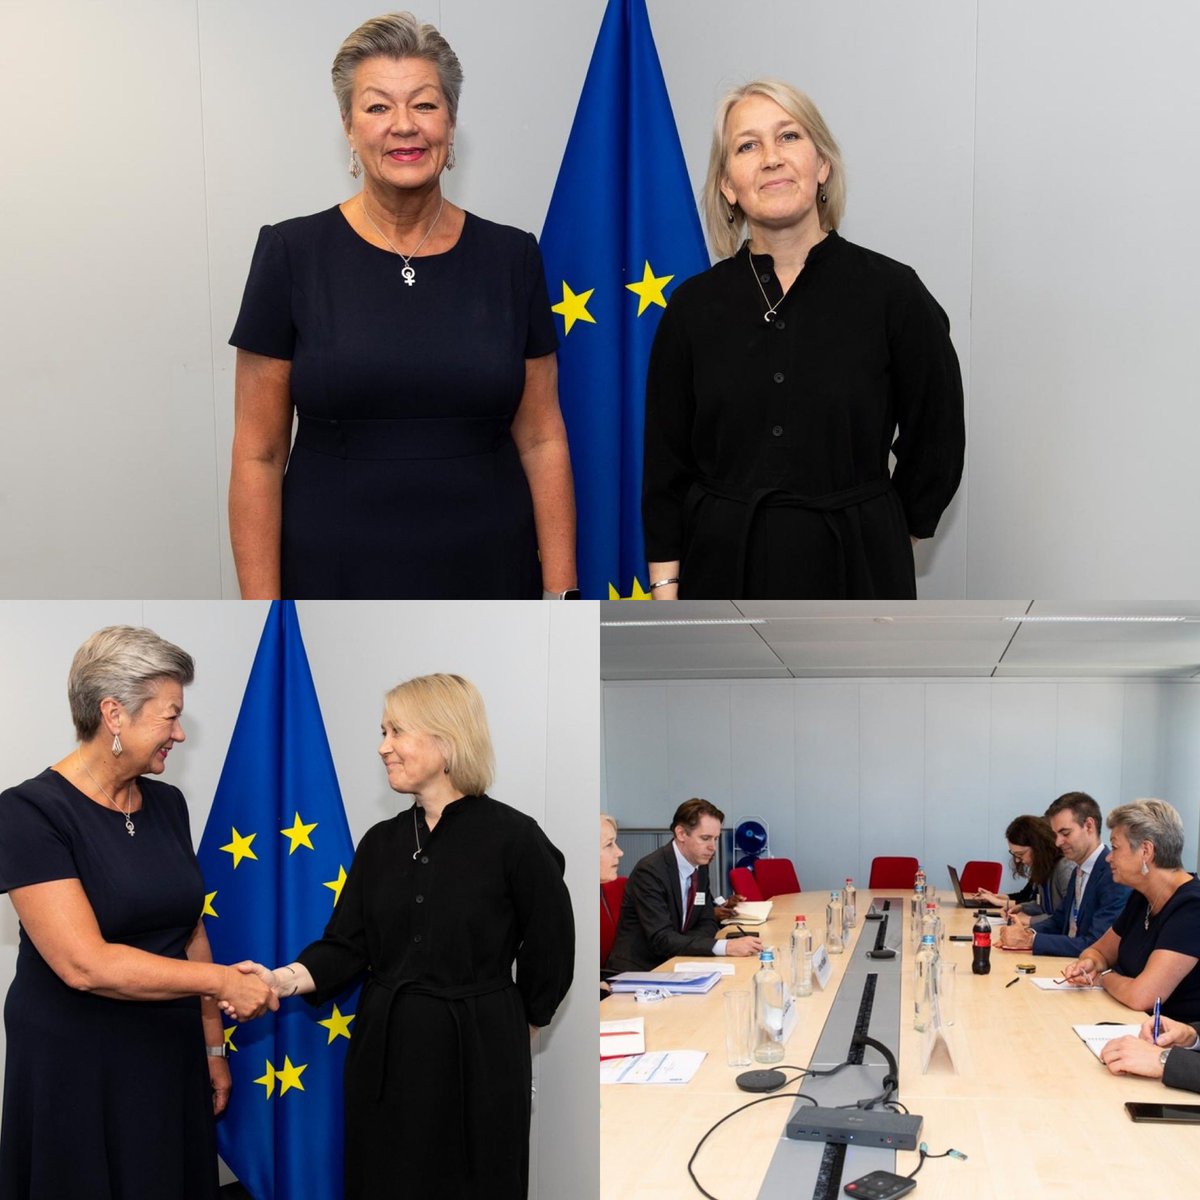 Great discussion w/ Commissioner @YlvaJohansson about development solutions to irregular migration and forced displacement. 
@UNDP also works closely with @EUHomeAffairs to promote a #SaferRegion in South-East Europe, supporting disarmament & arms control.